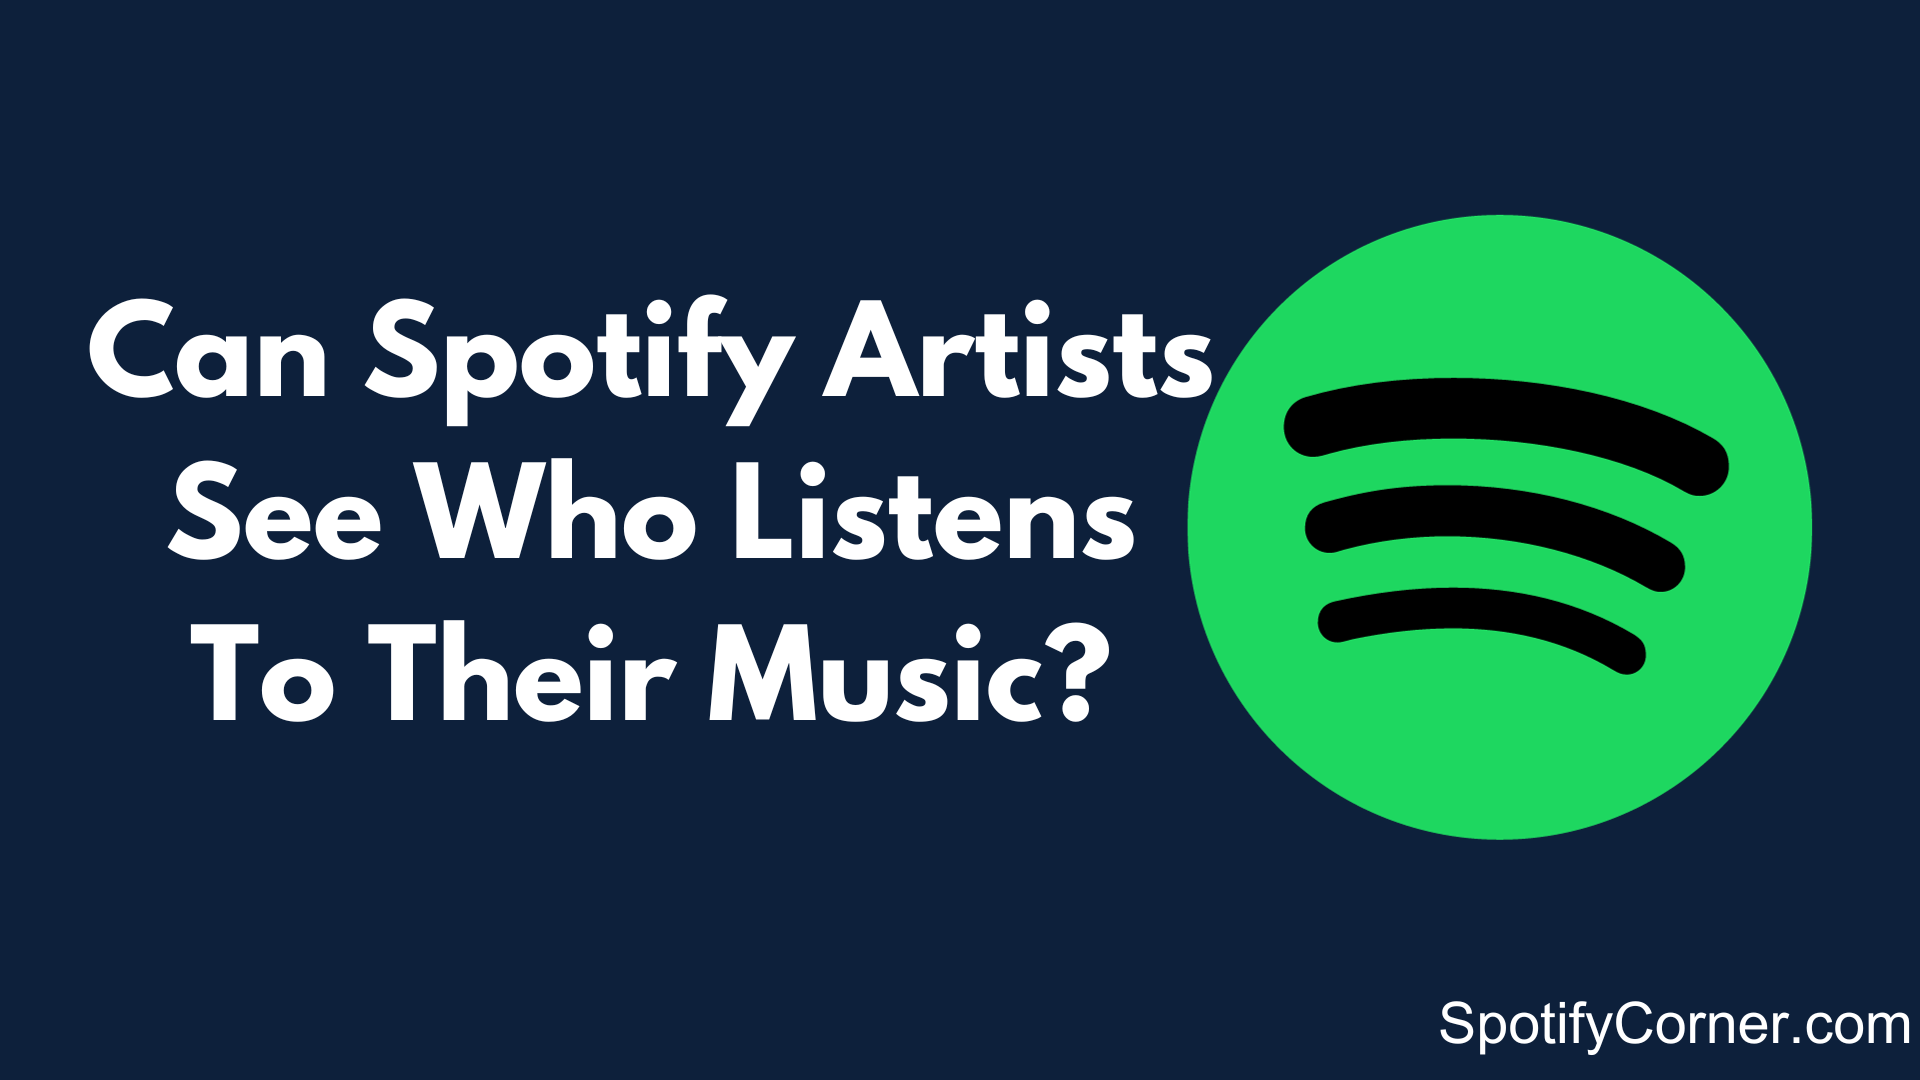 Can Spotify Artists See Who Listens To Their Music